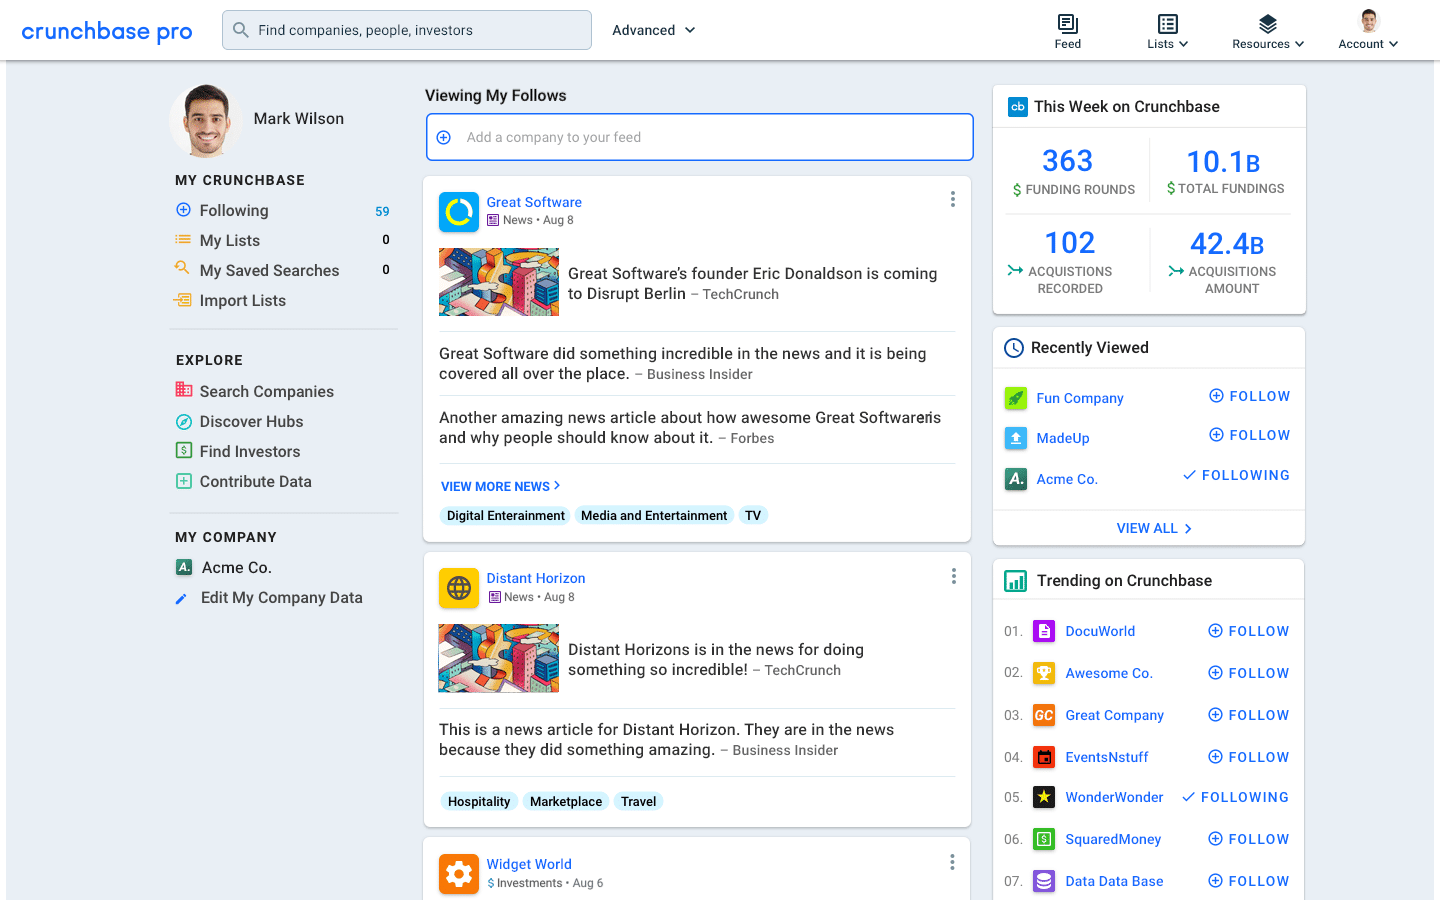 Personalized Crunchbase Homepage for Logged In Users